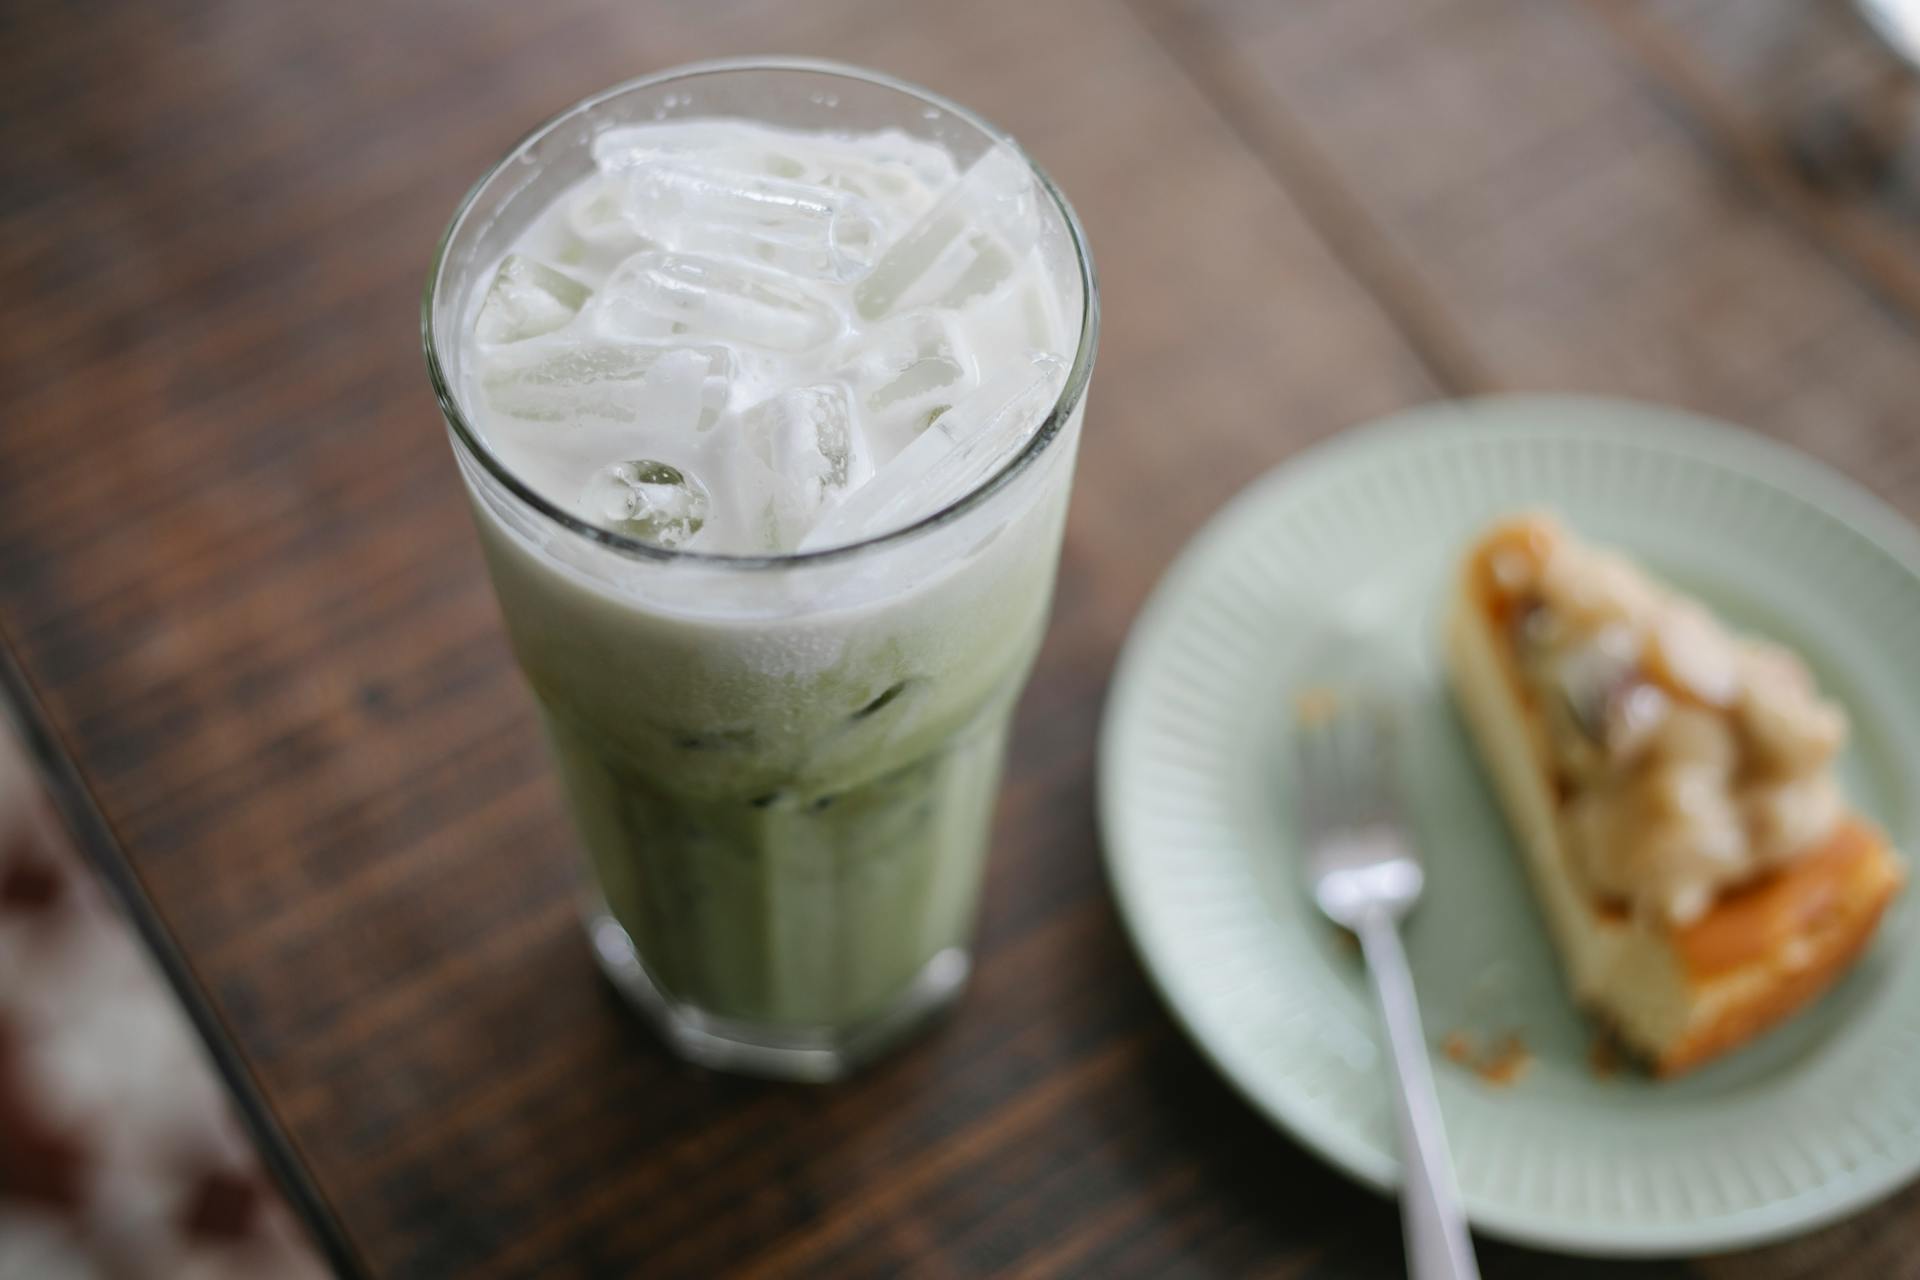 Tasty iced matcha latte served with sweet pie